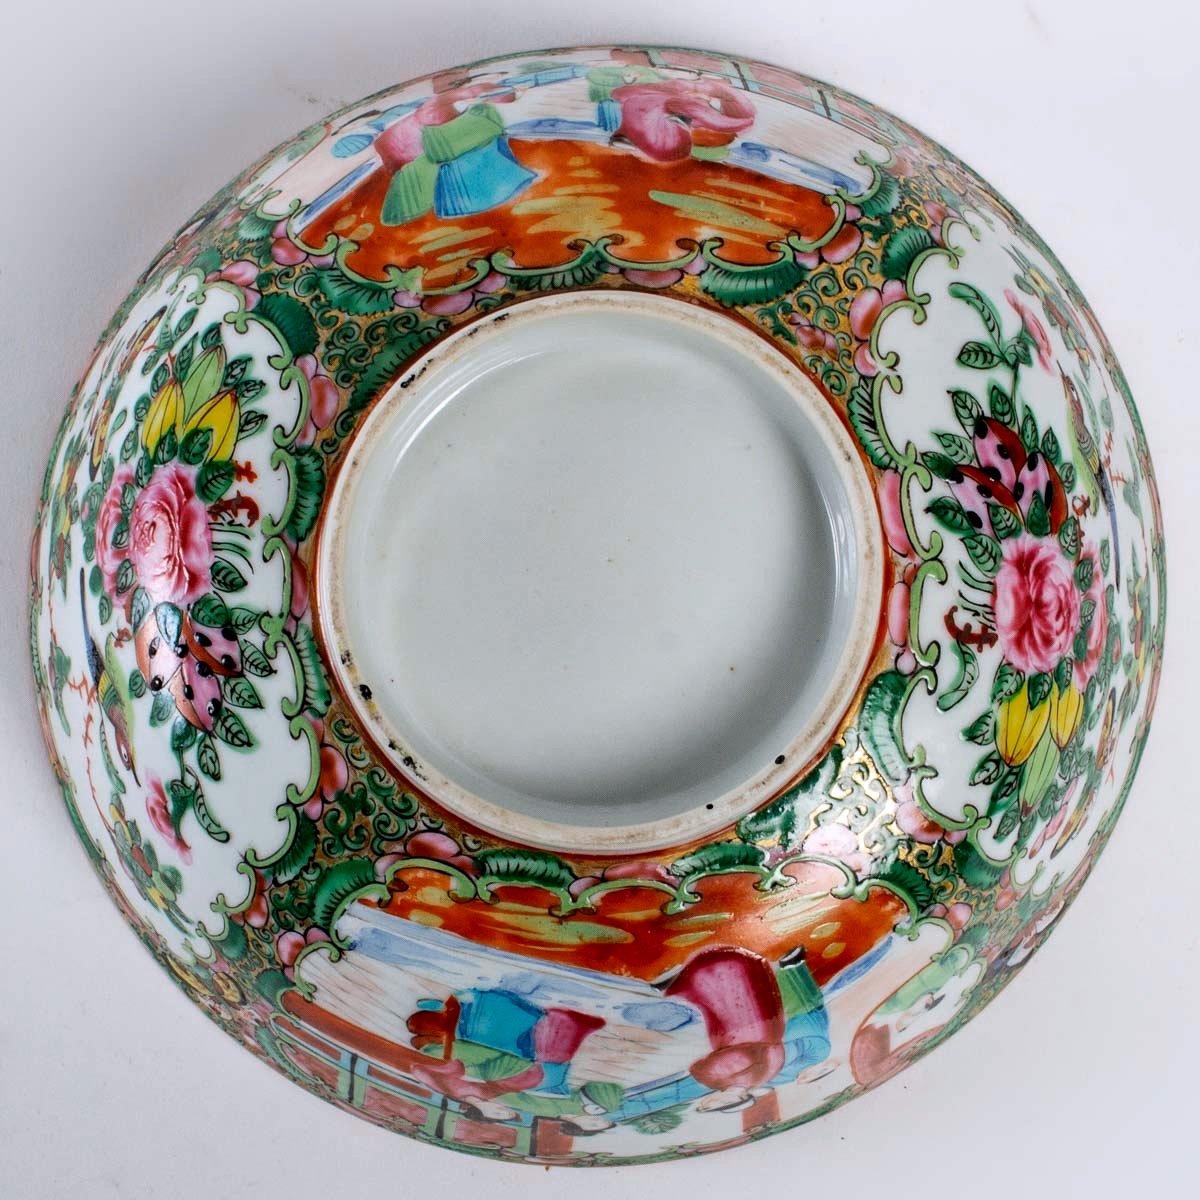 Asian Canton Polychrome Porcelain Circular Cup, Period, Mid-19th Century For Sale